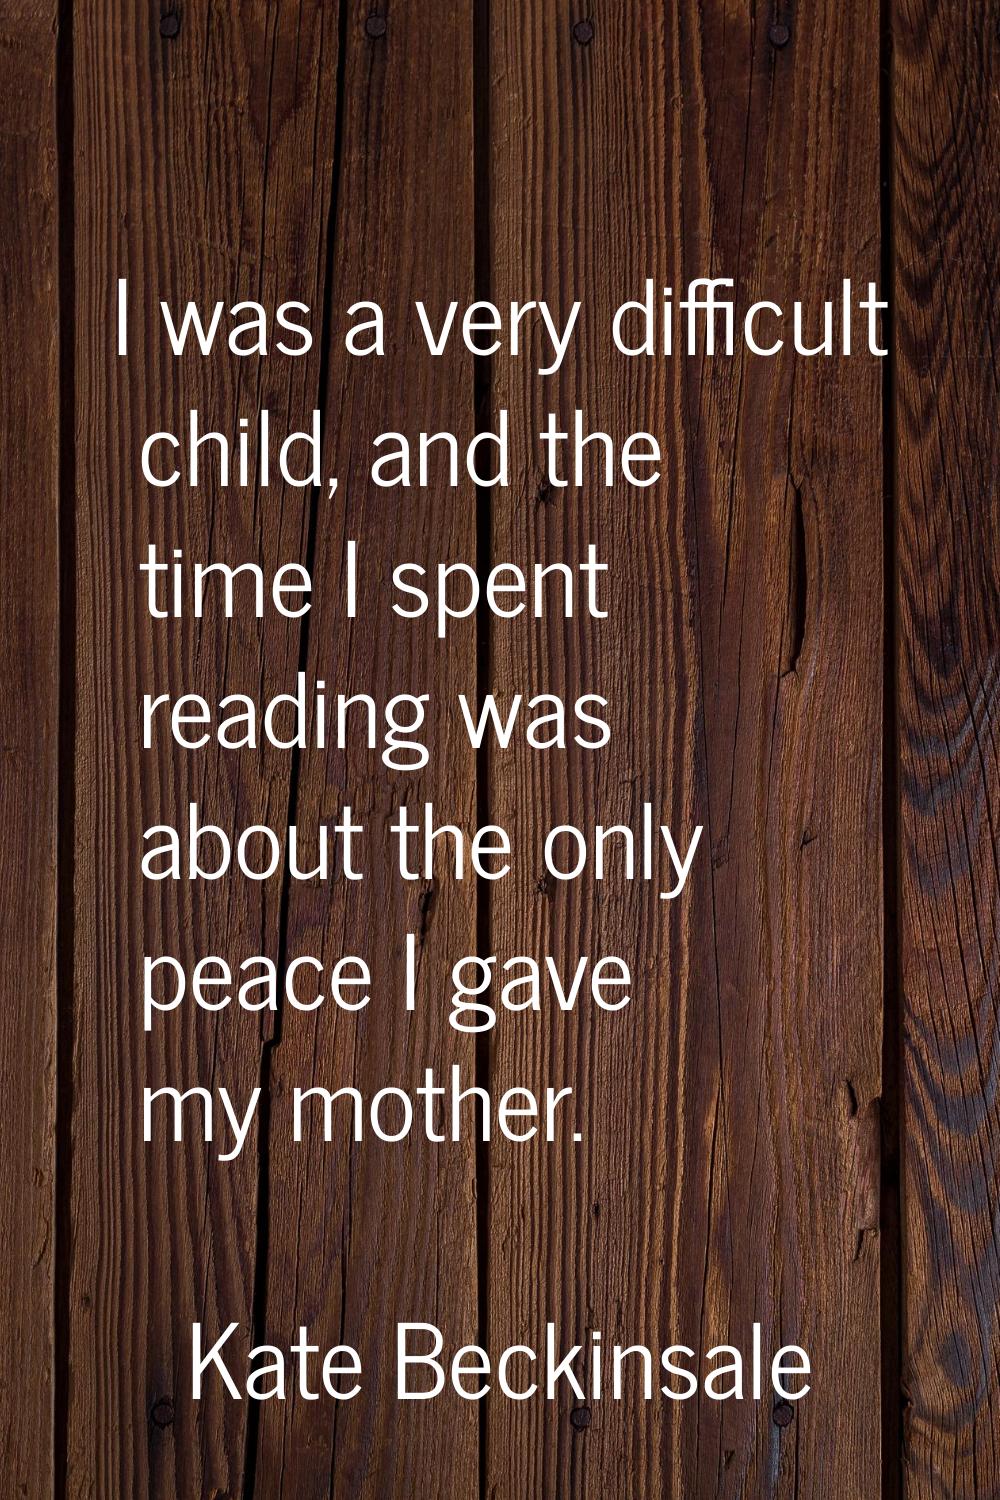 I was a very difficult child, and the time I spent reading was about the only peace I gave my mothe